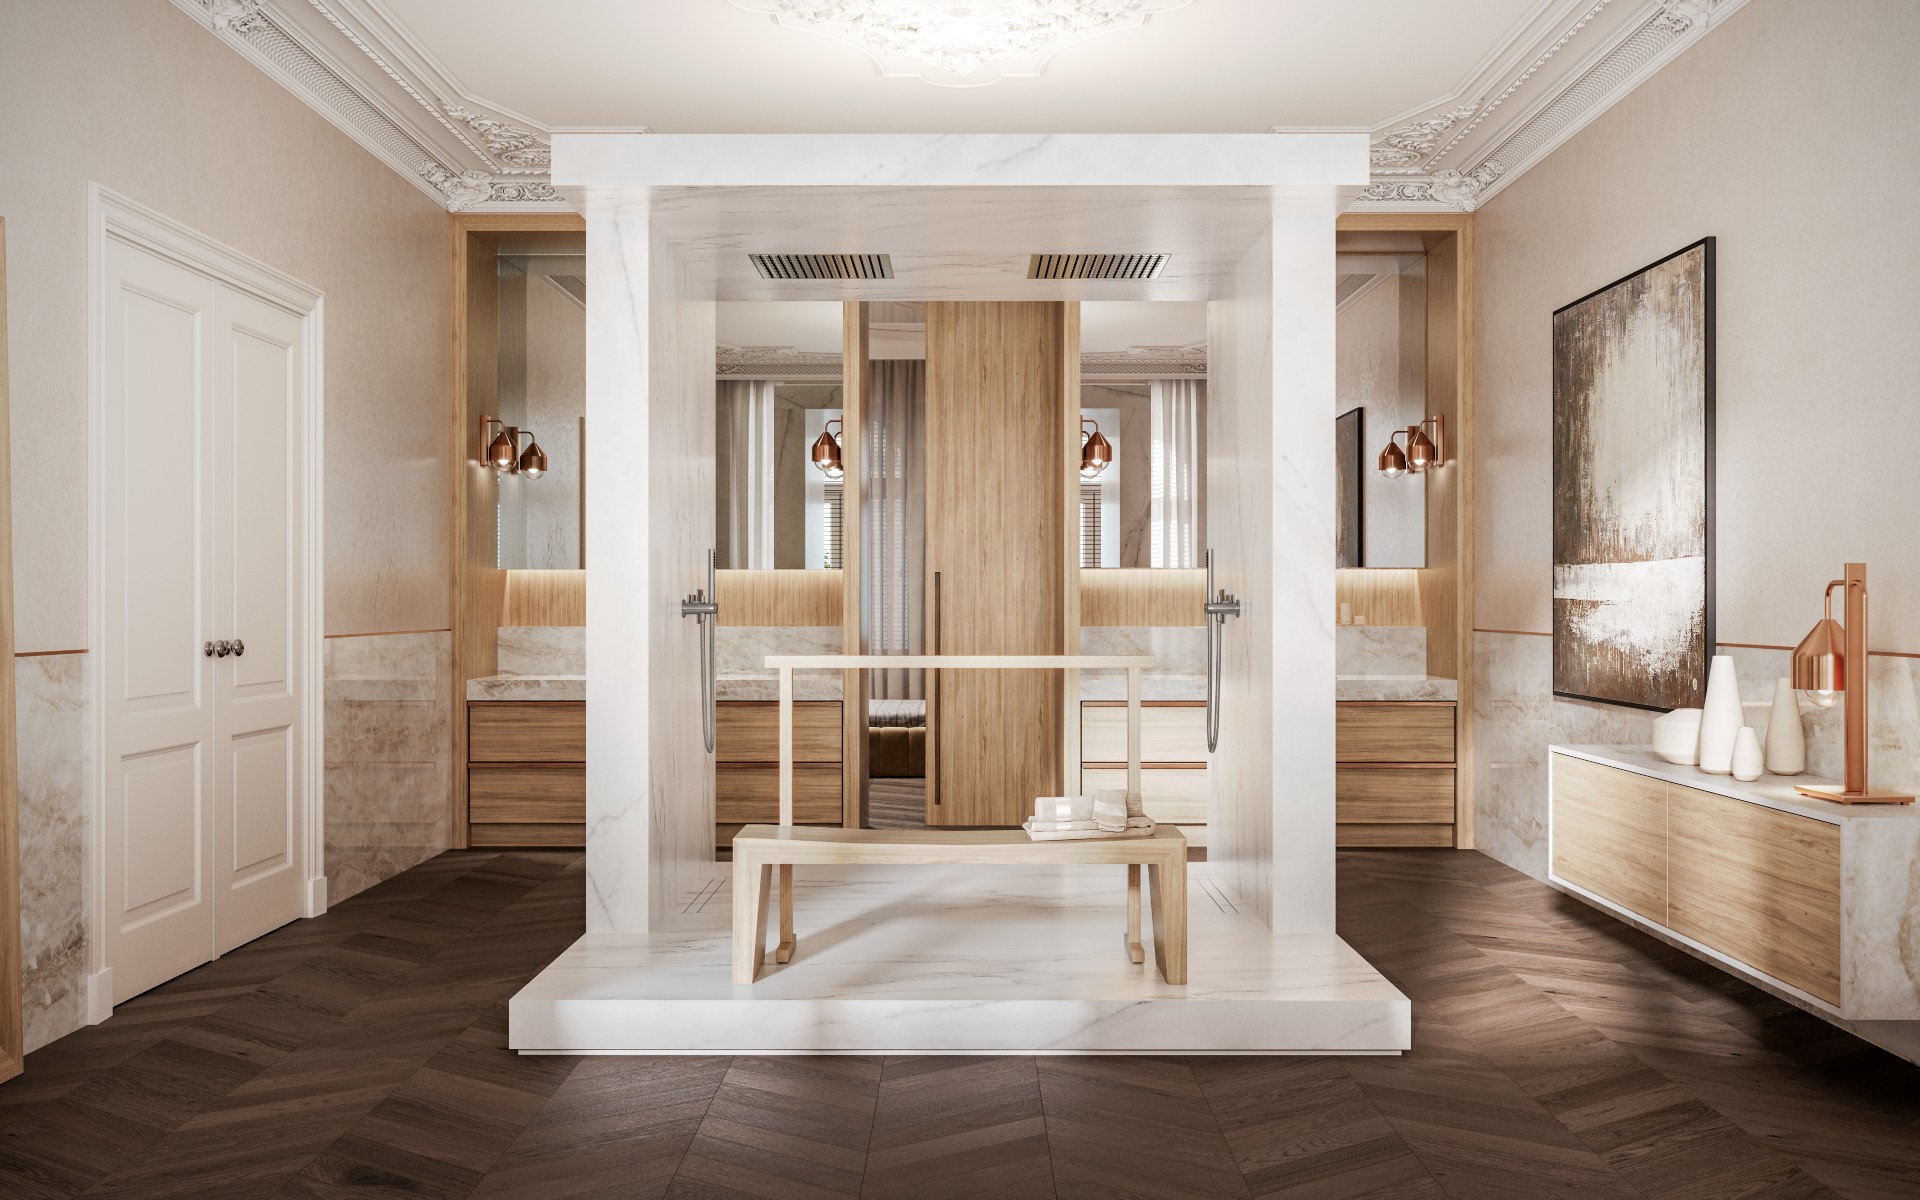 Image of THE PALAZZO IMÁGEN GENERAL in The Resilient House: the bathroom by MUT Design that evokes Roman baths and nods to stone quarries - Cosentino